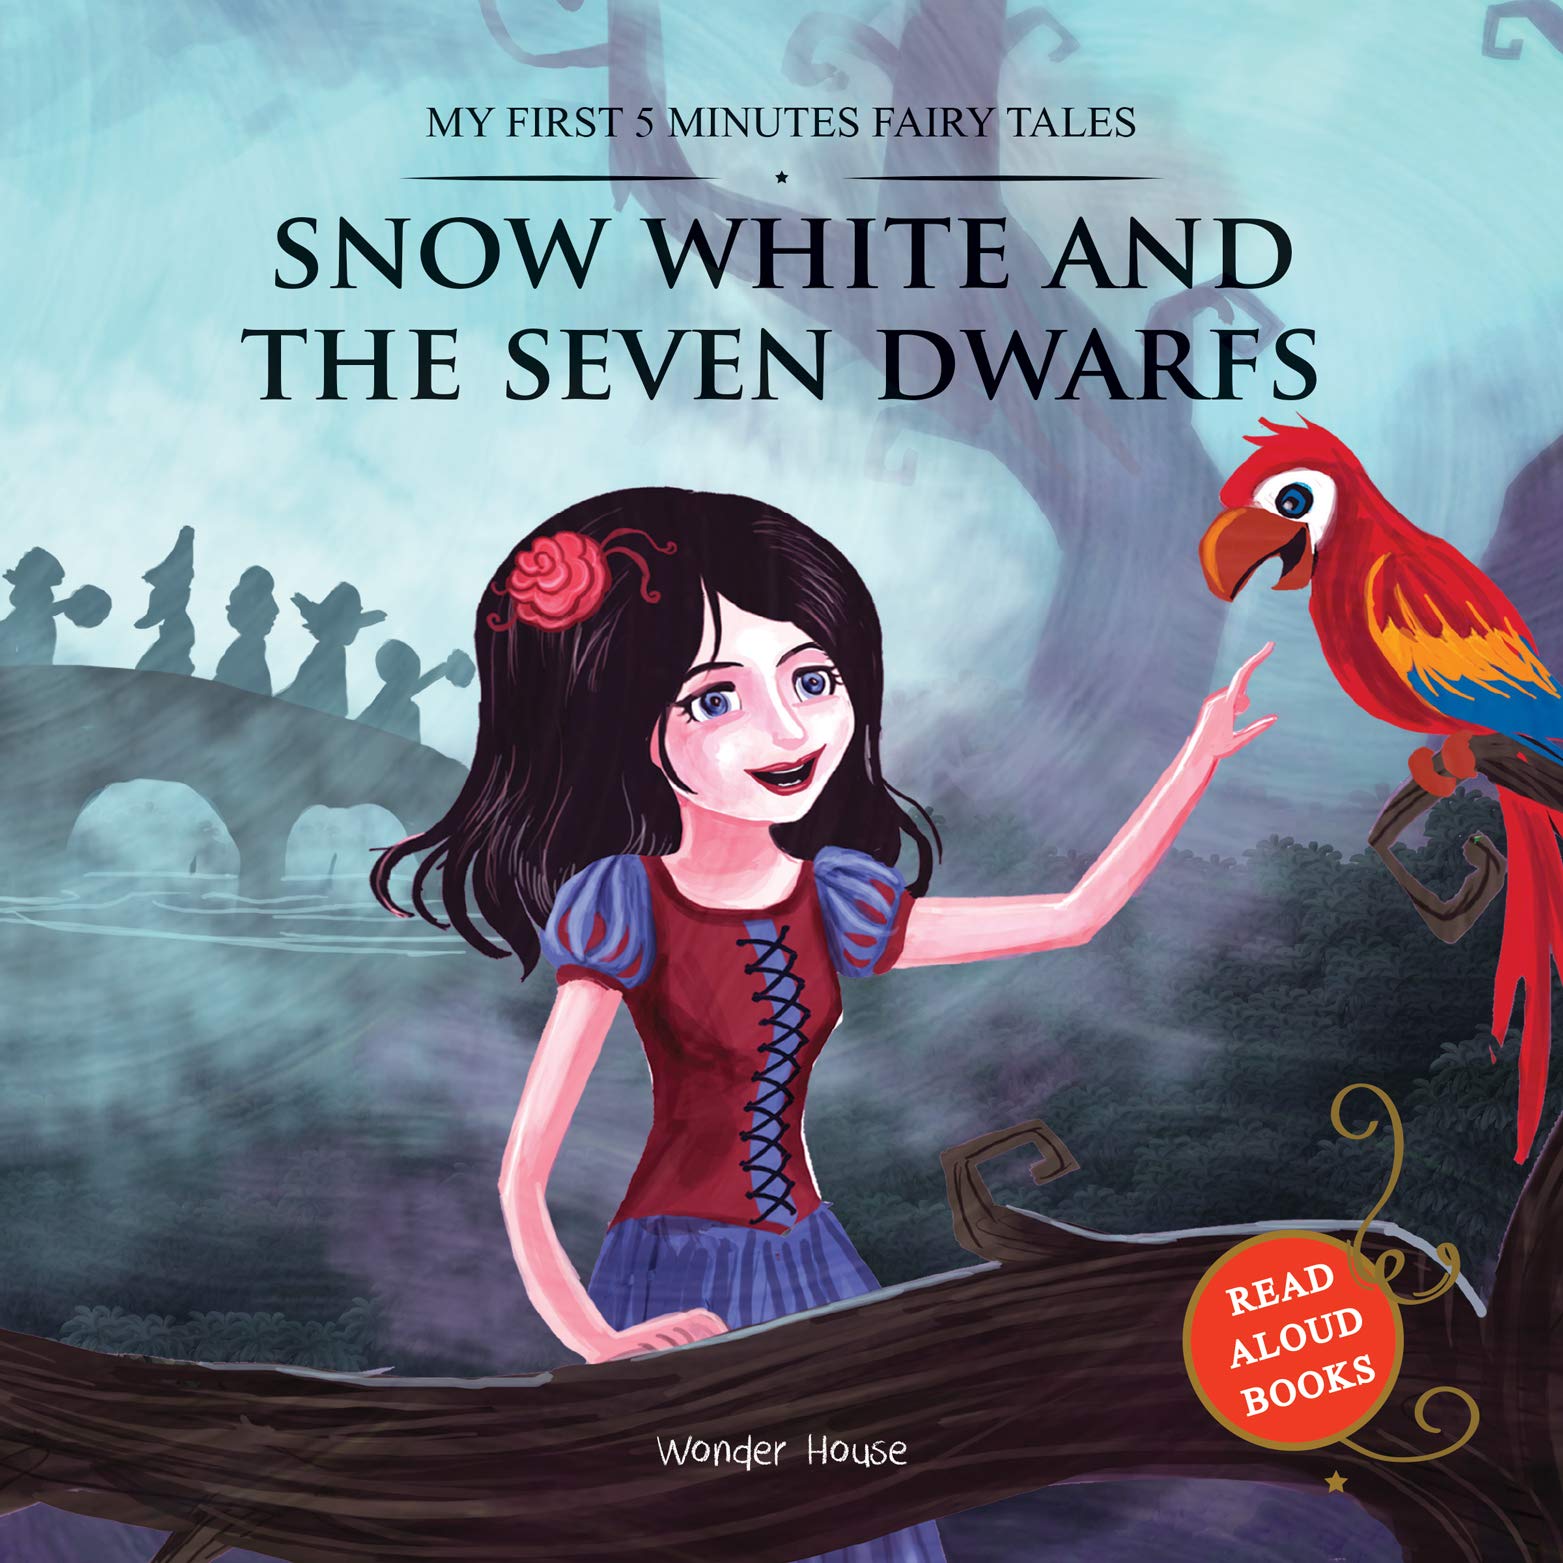 My First 5 Minutes Fairy Tales: Snow White and the Seven Dwarfs